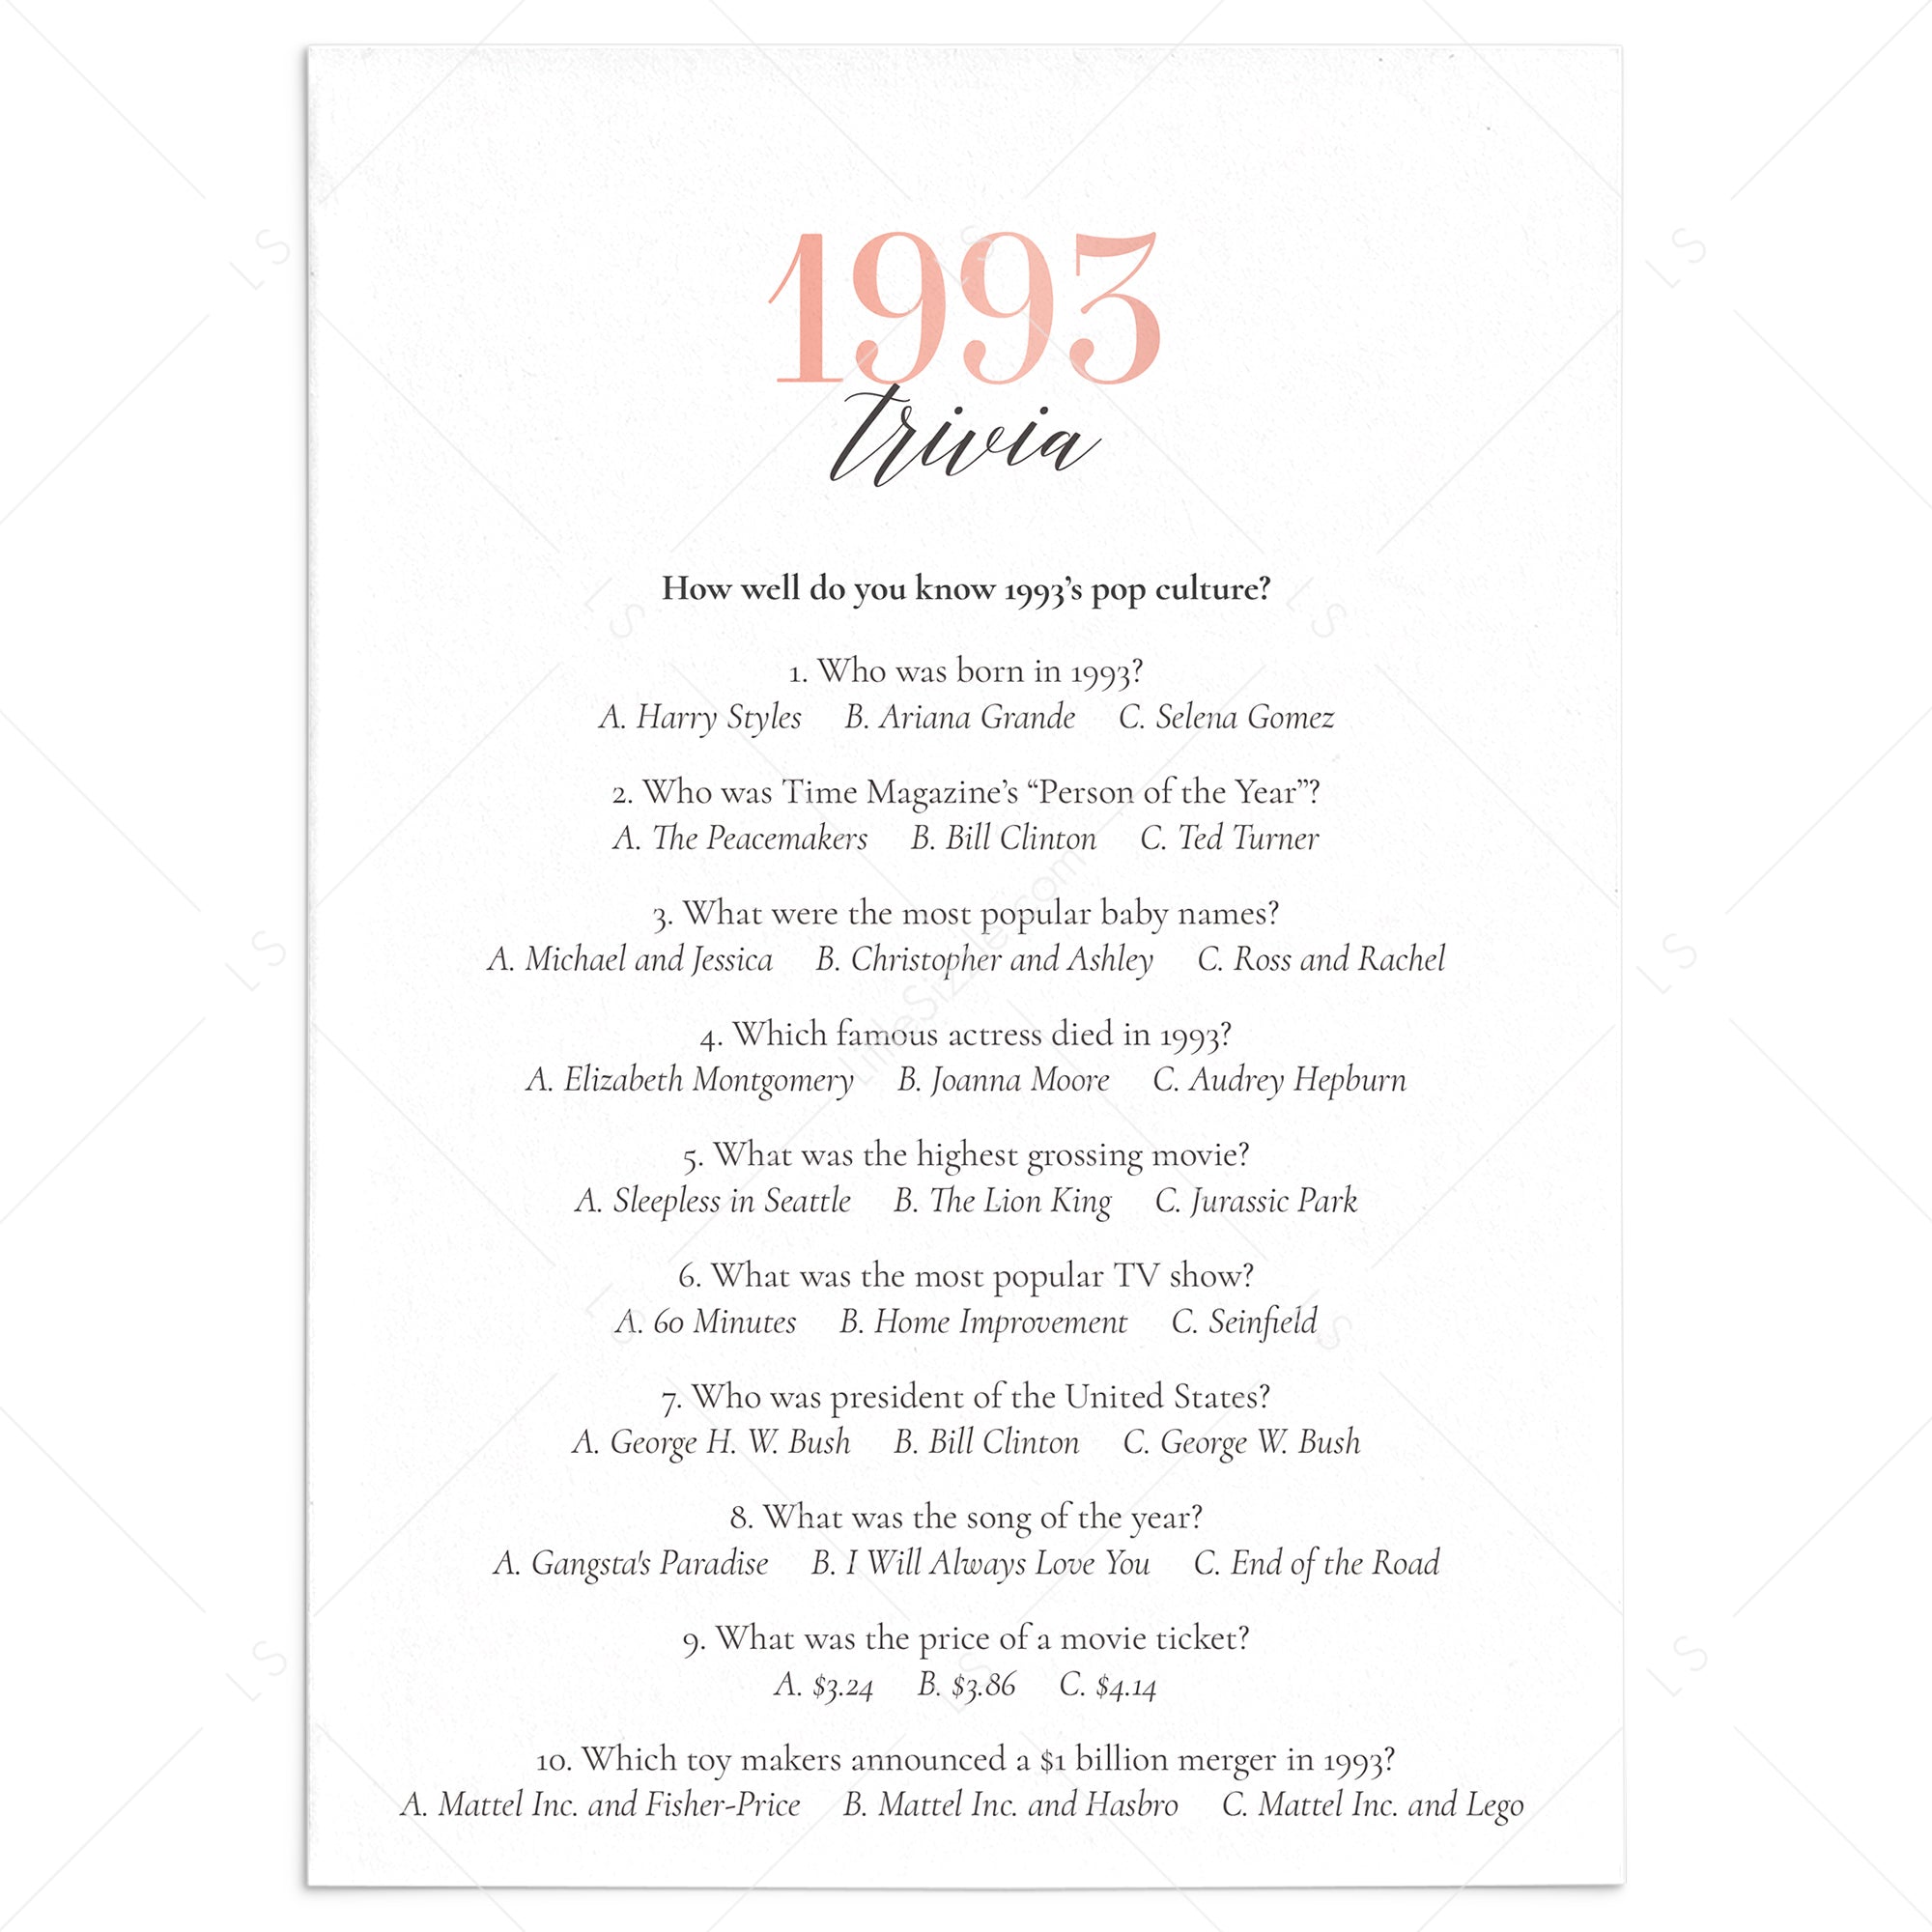 1993 Trivia Questions and Answers Printable by LittleSizzle